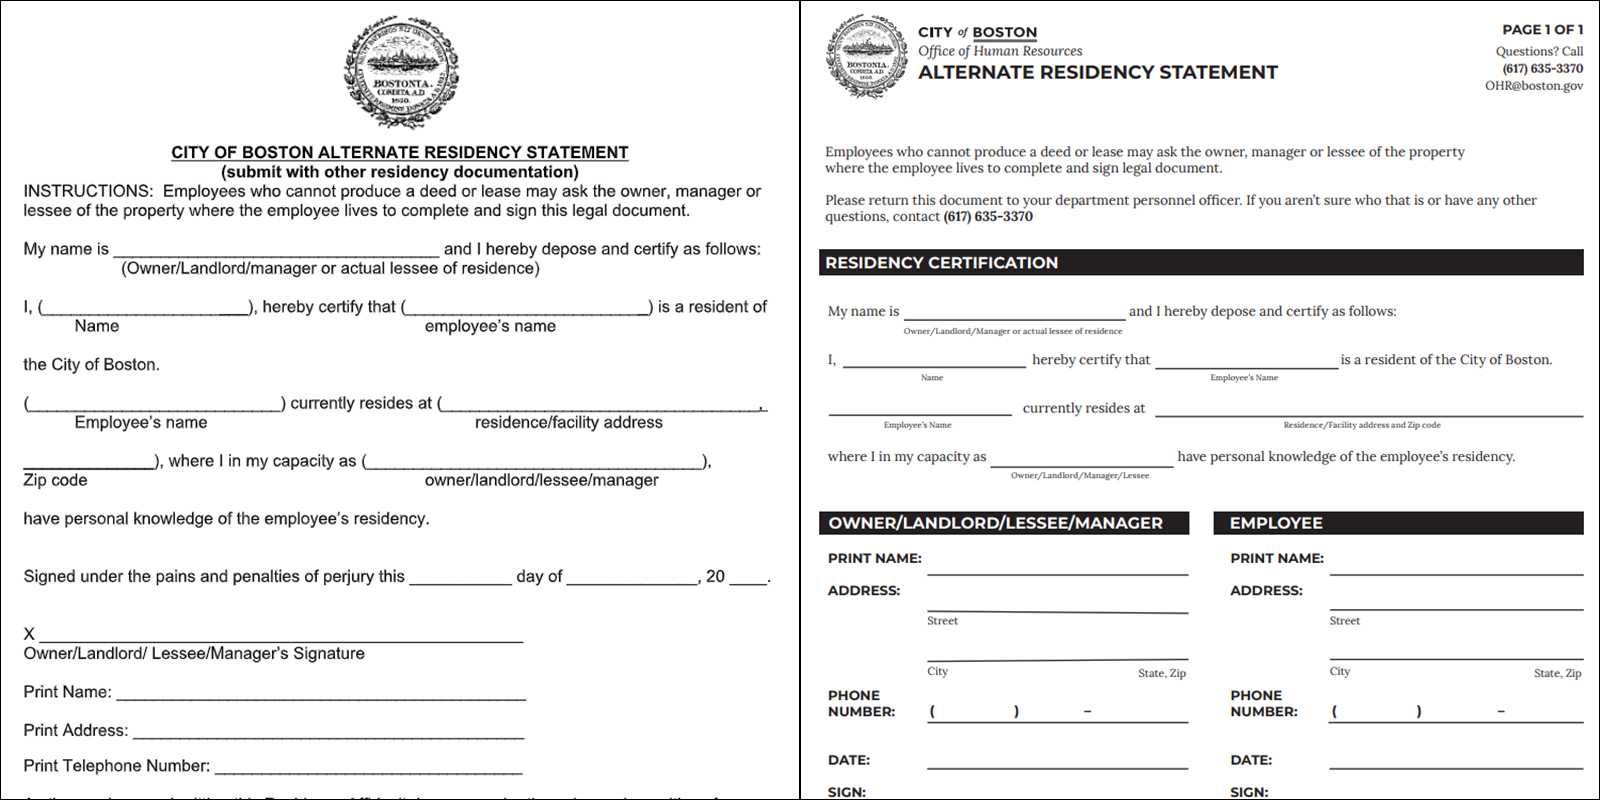 Image for the application for an alternate residency statement, before (left) and after (right) 